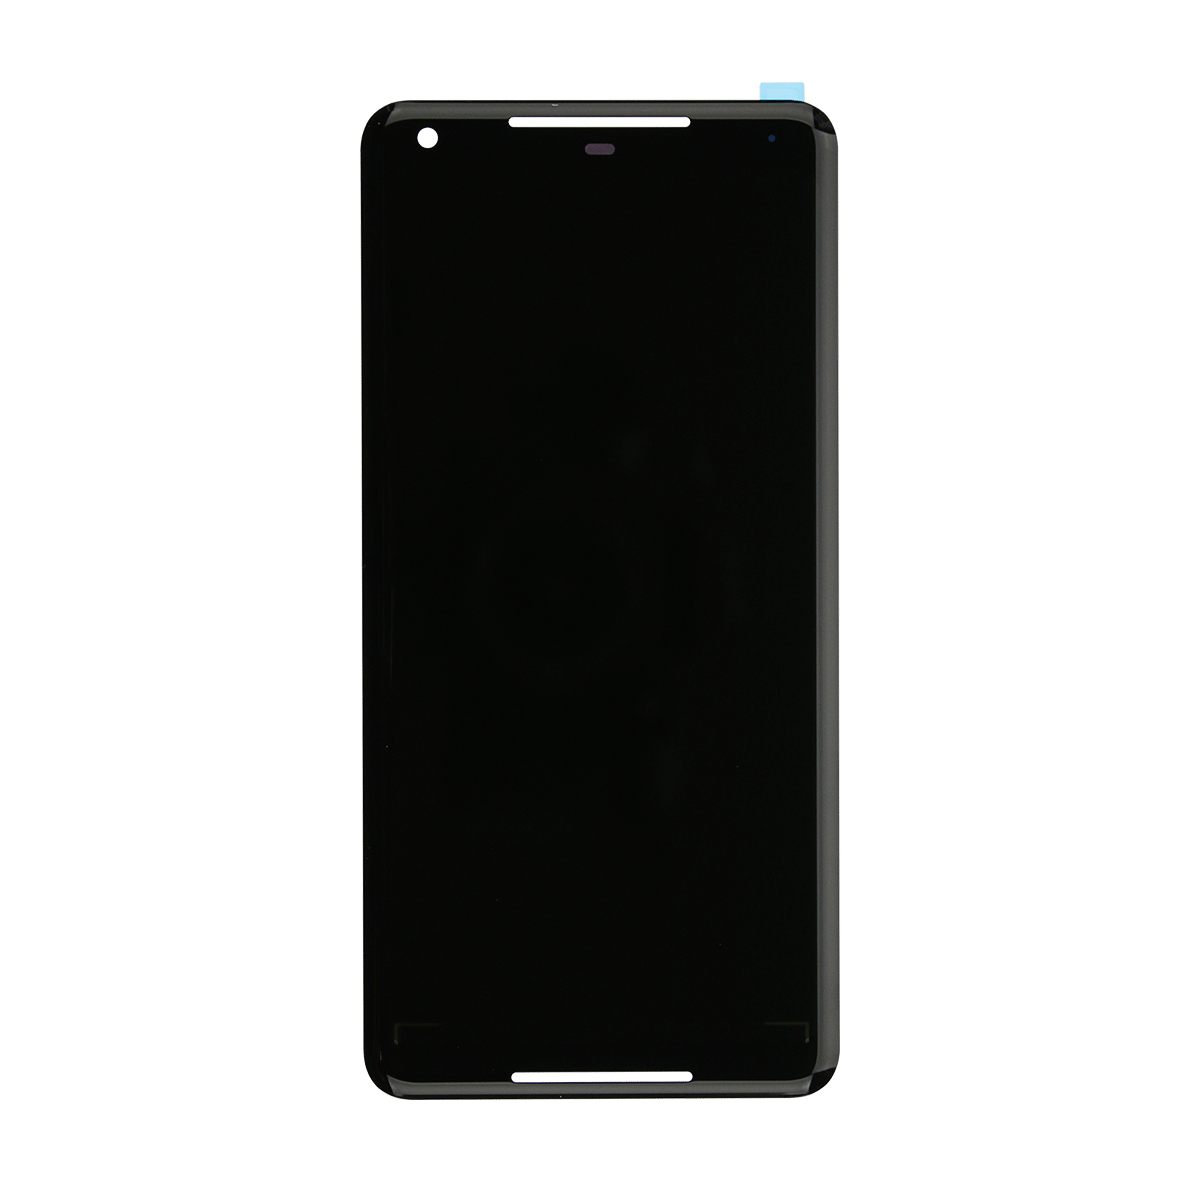 Google Pixel 2 XL LCD & Touch Screen Assembly Replacement